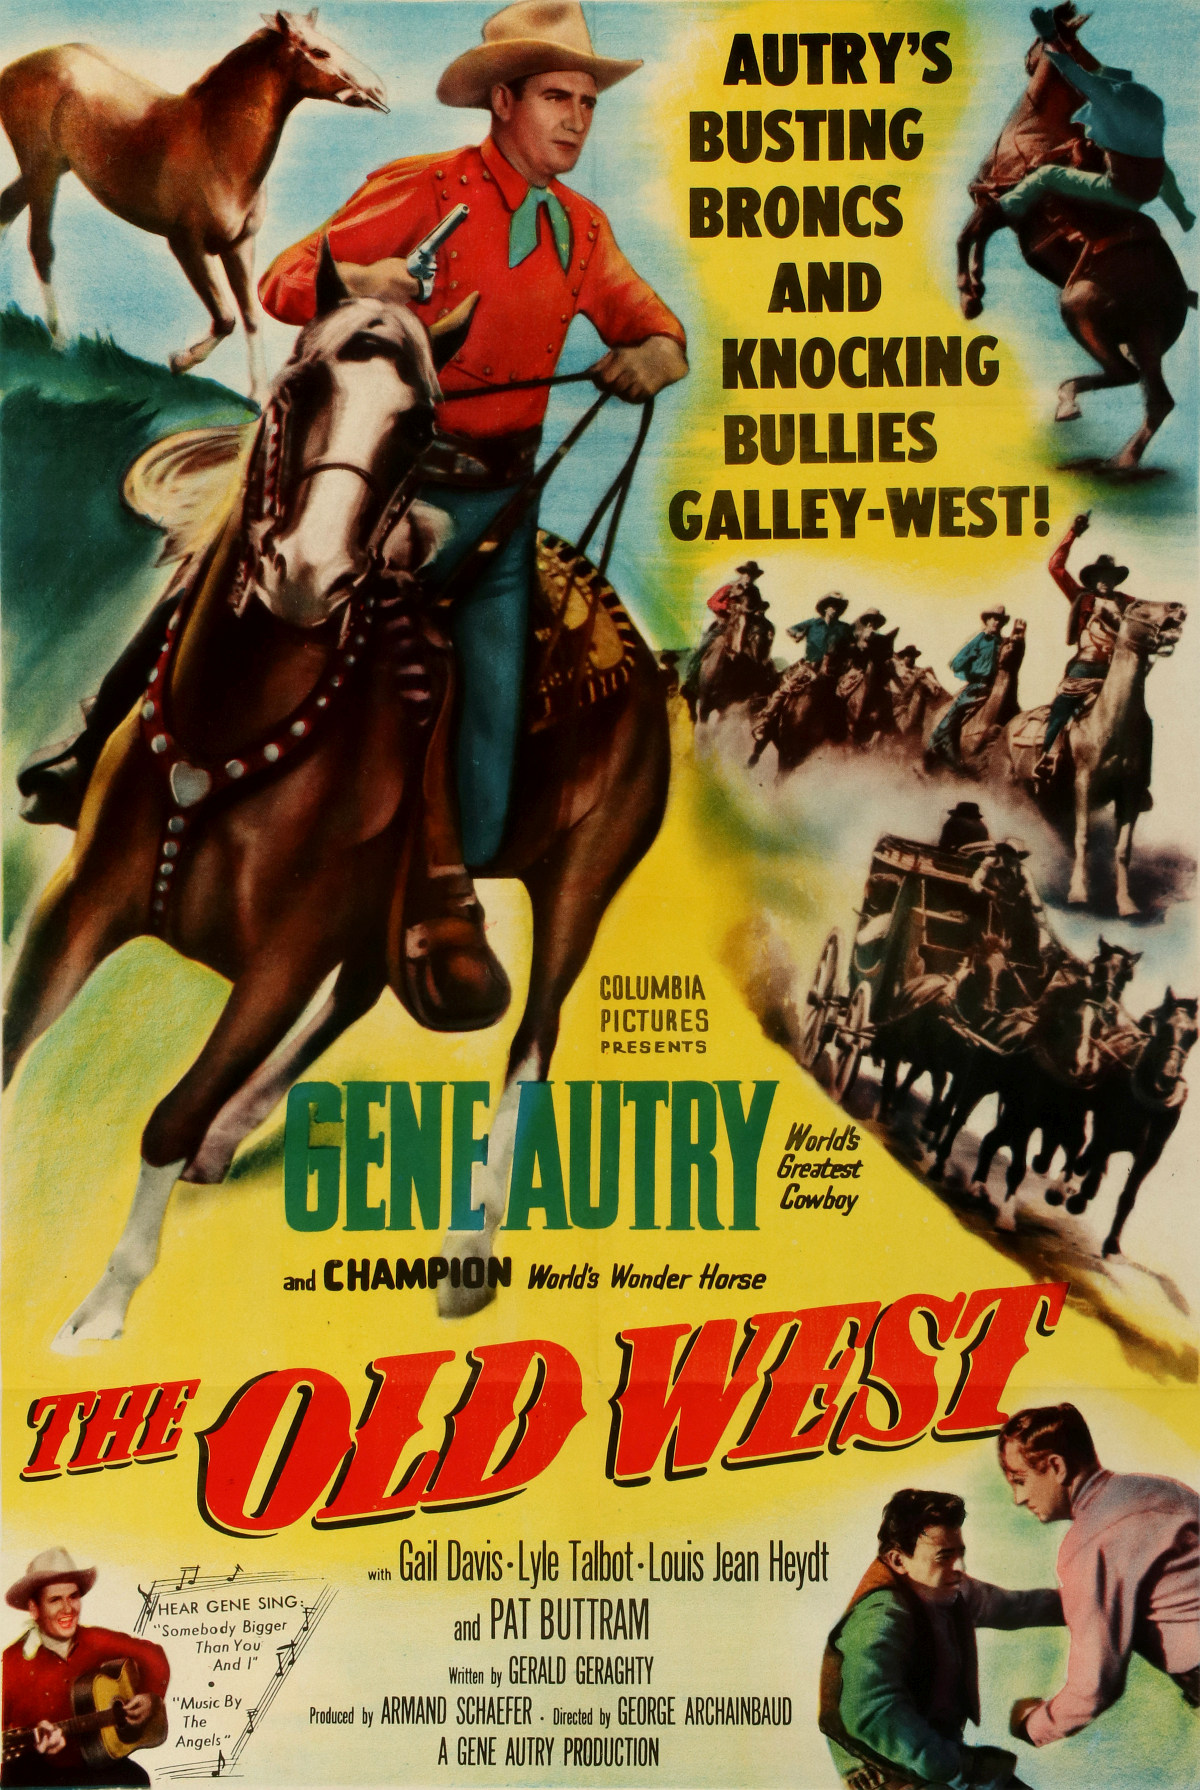 AN ORIGINAL 1951 GENE AUTRY 'THE OLD WEST' MOVIE POSTER